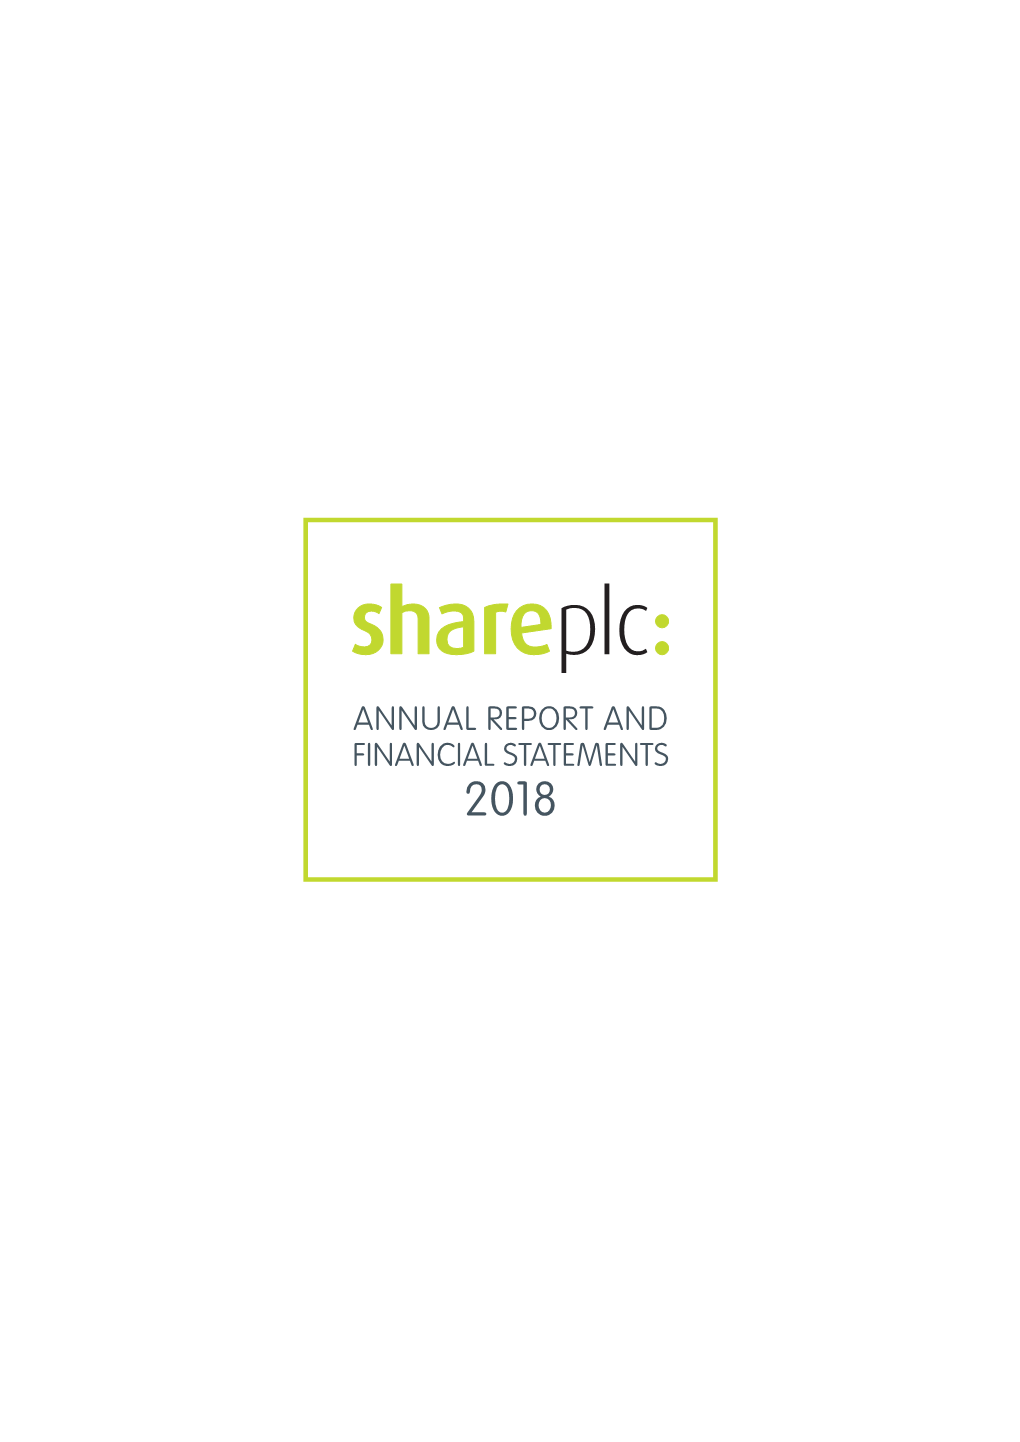 Annual Report and Financial Statements 2018